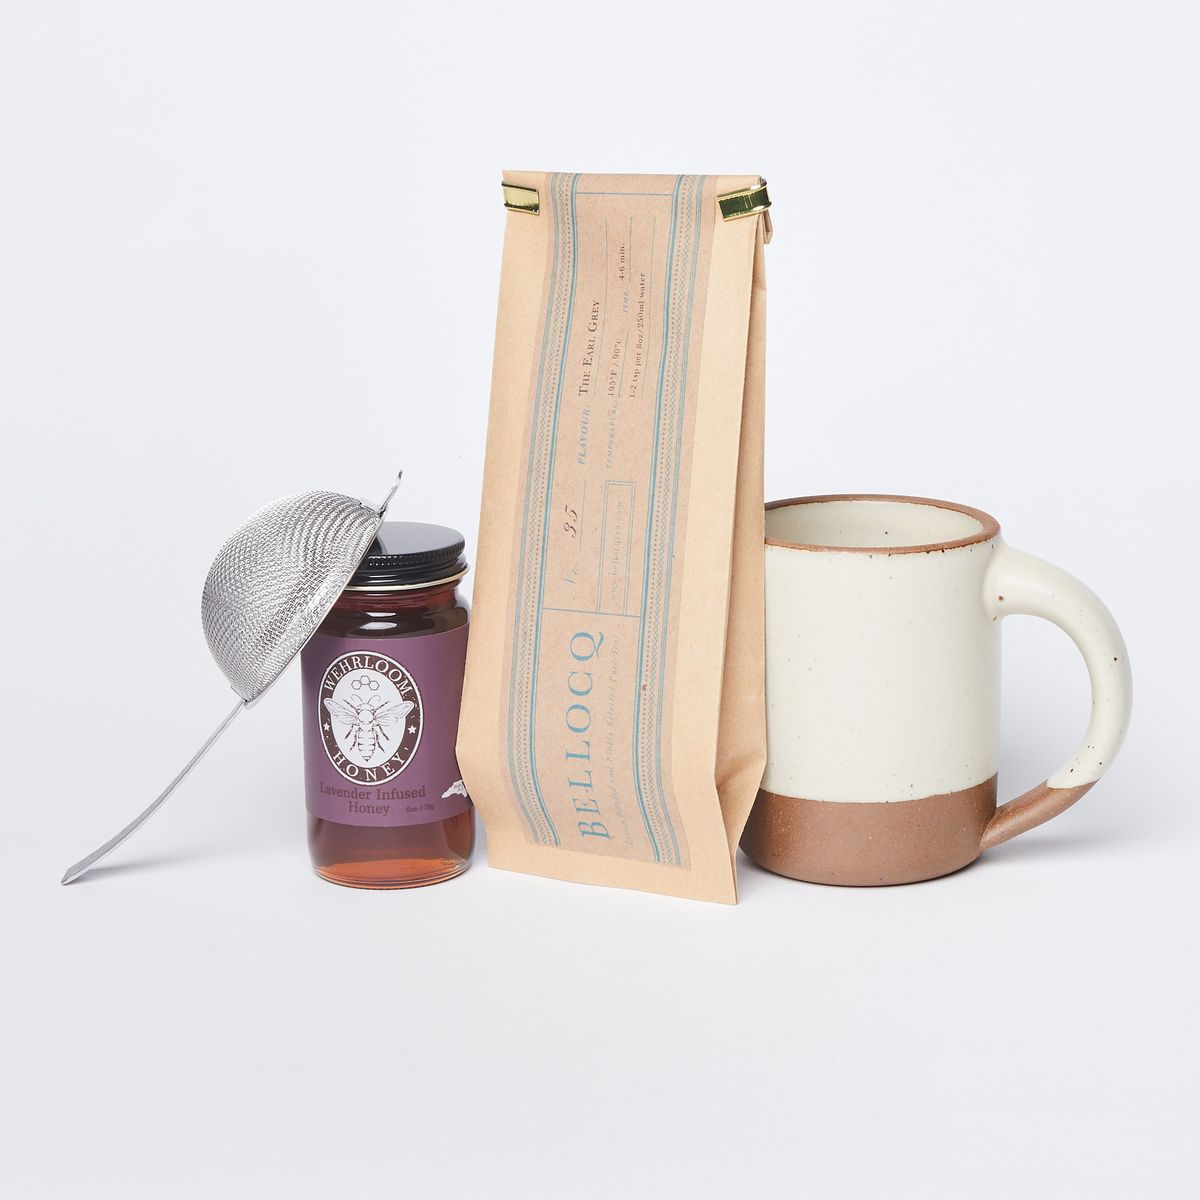 Tea strainer leaning on a jar of honey, brown bag of tea with turquoise lettering "Bellocq", panna cotta mug